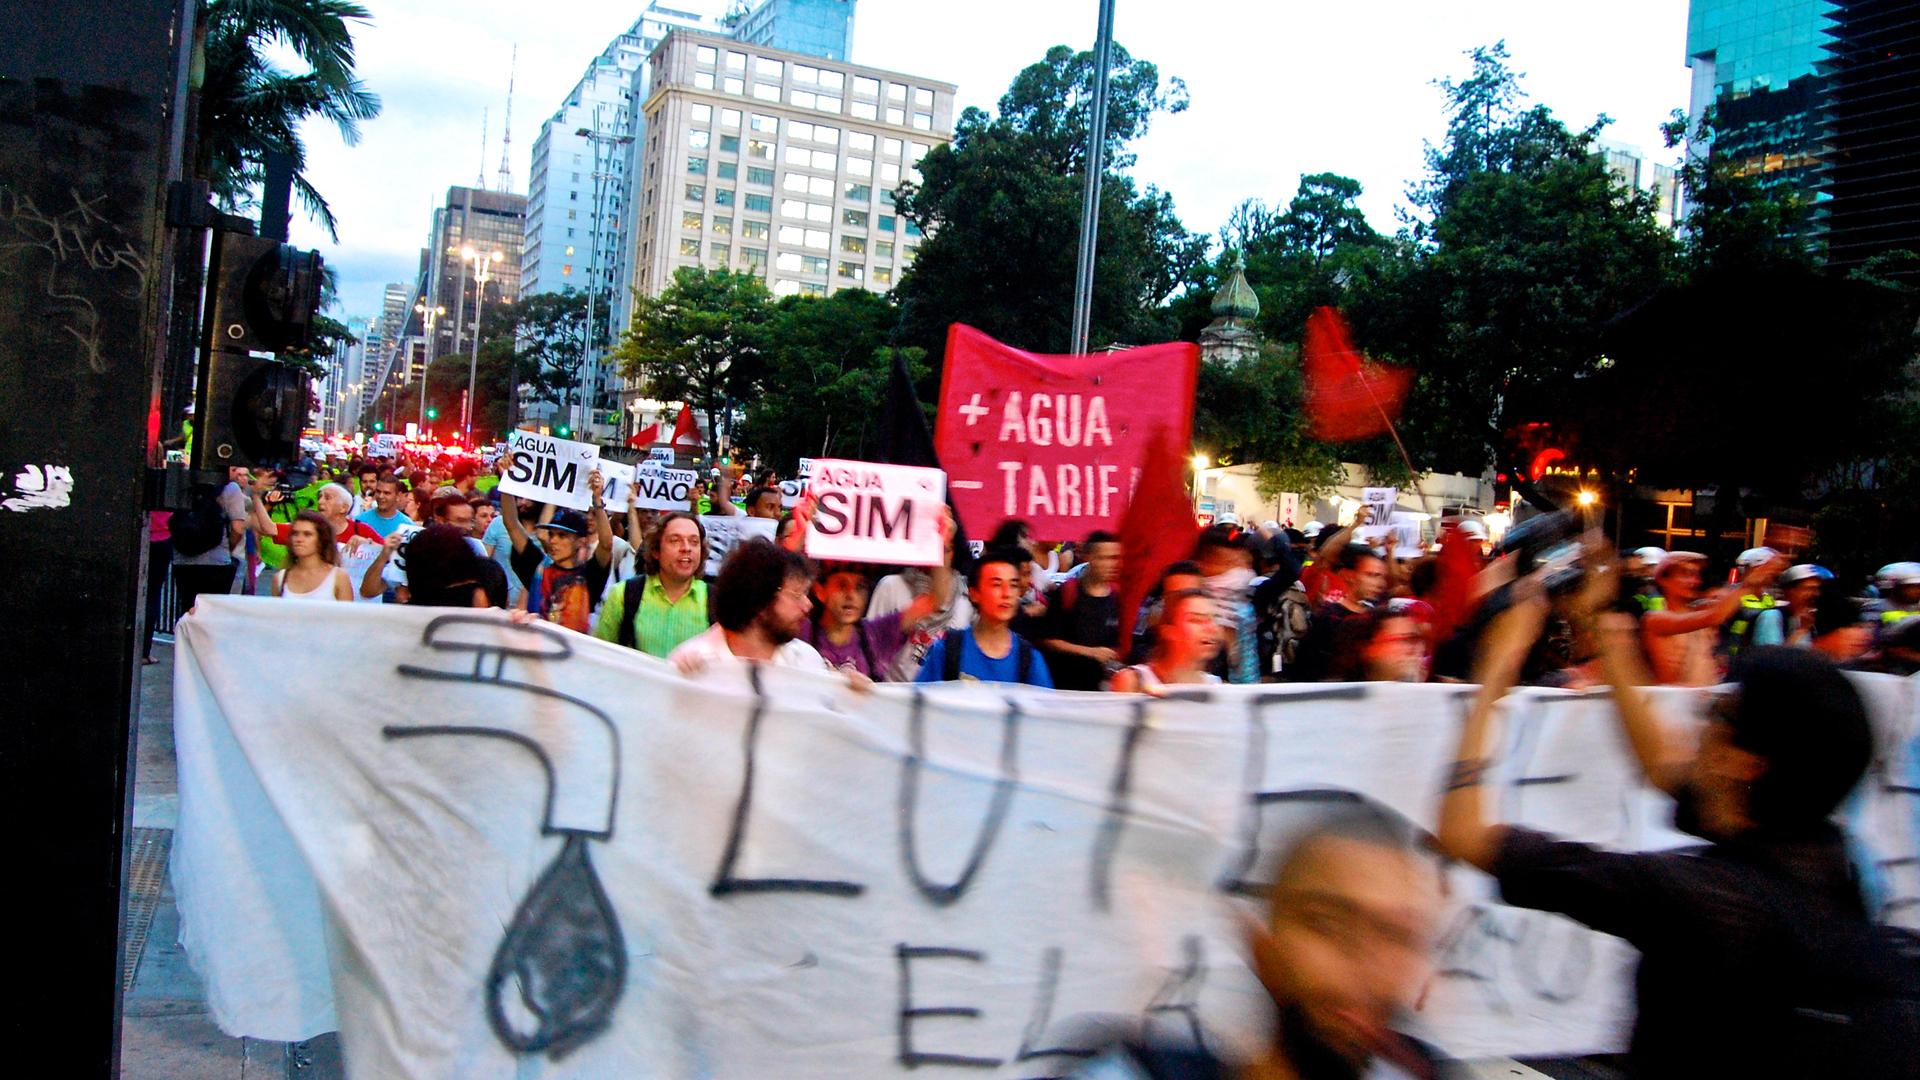 Protesters march through São Paulo recently demanding equitable distribution of water throughout São Paulo state. Unofficial rationing has brought frequent water outages to neighborhoods throughout the Brazilian megalopolis of 20 million people.